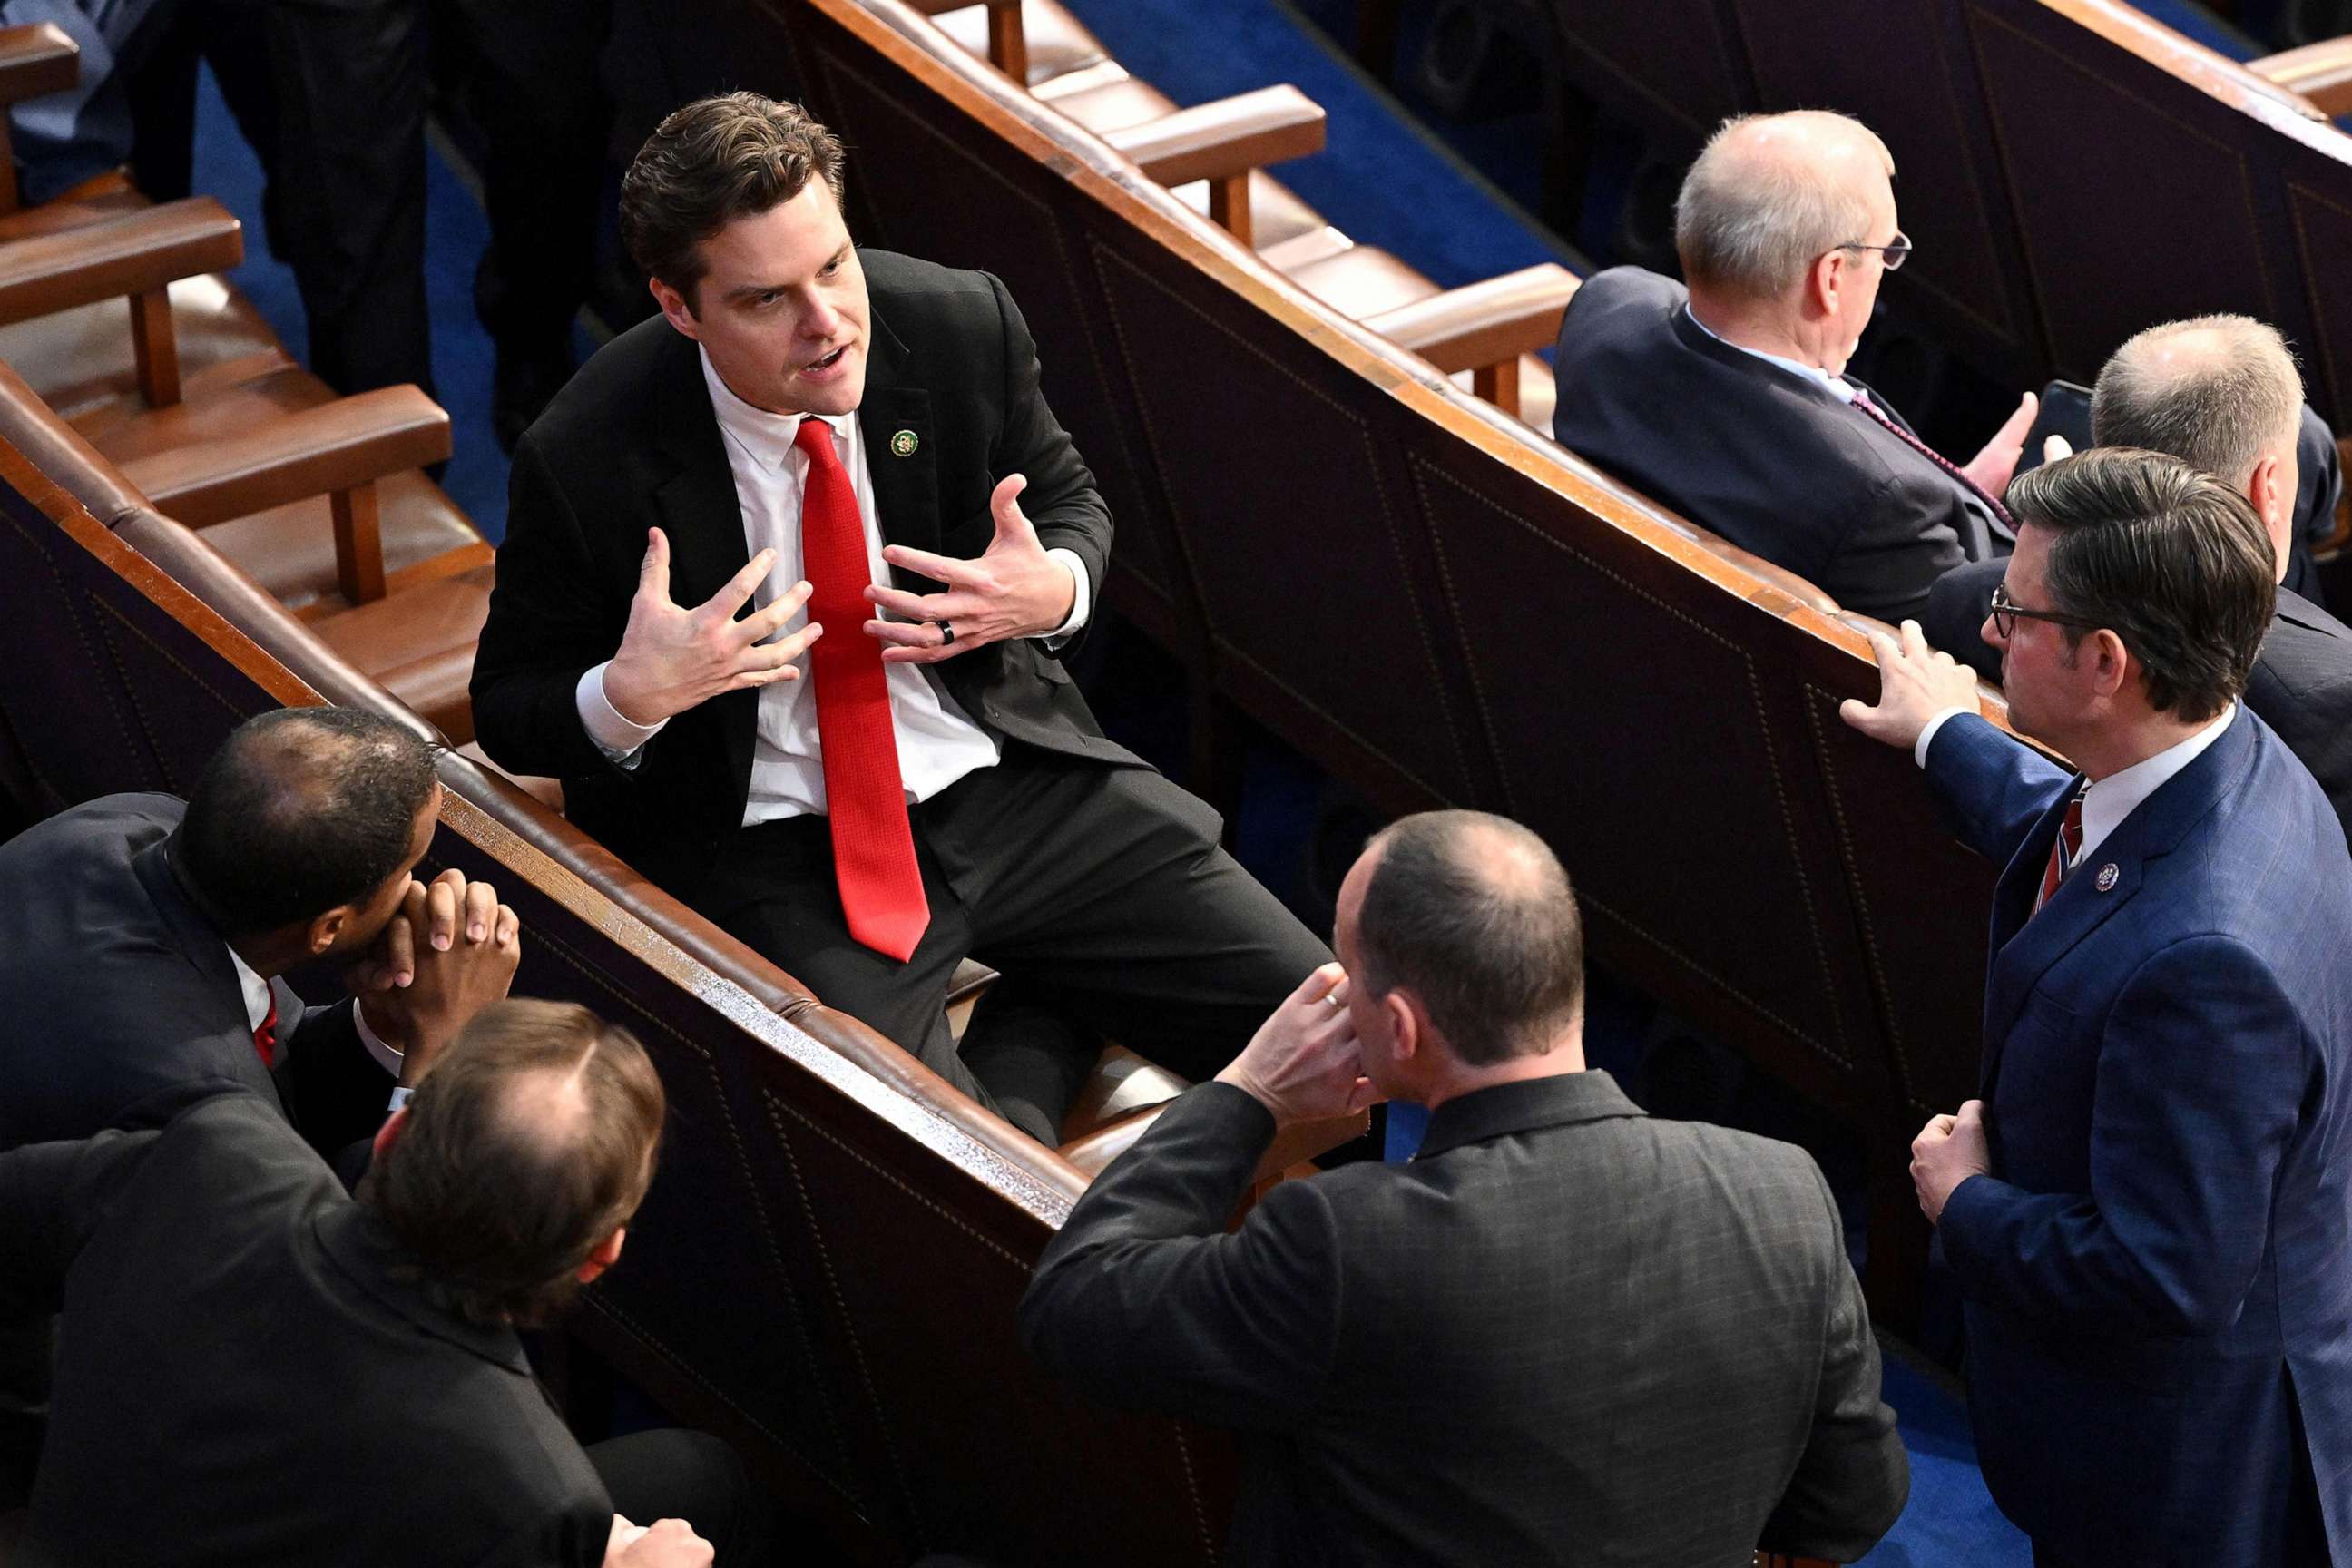 PHOTO: Rep. Matt Gaetz speaks with lawmakers as the House of Representatives convenes for the 118th Congress at the US Capitol in Washington, Jan. 3, 2023.